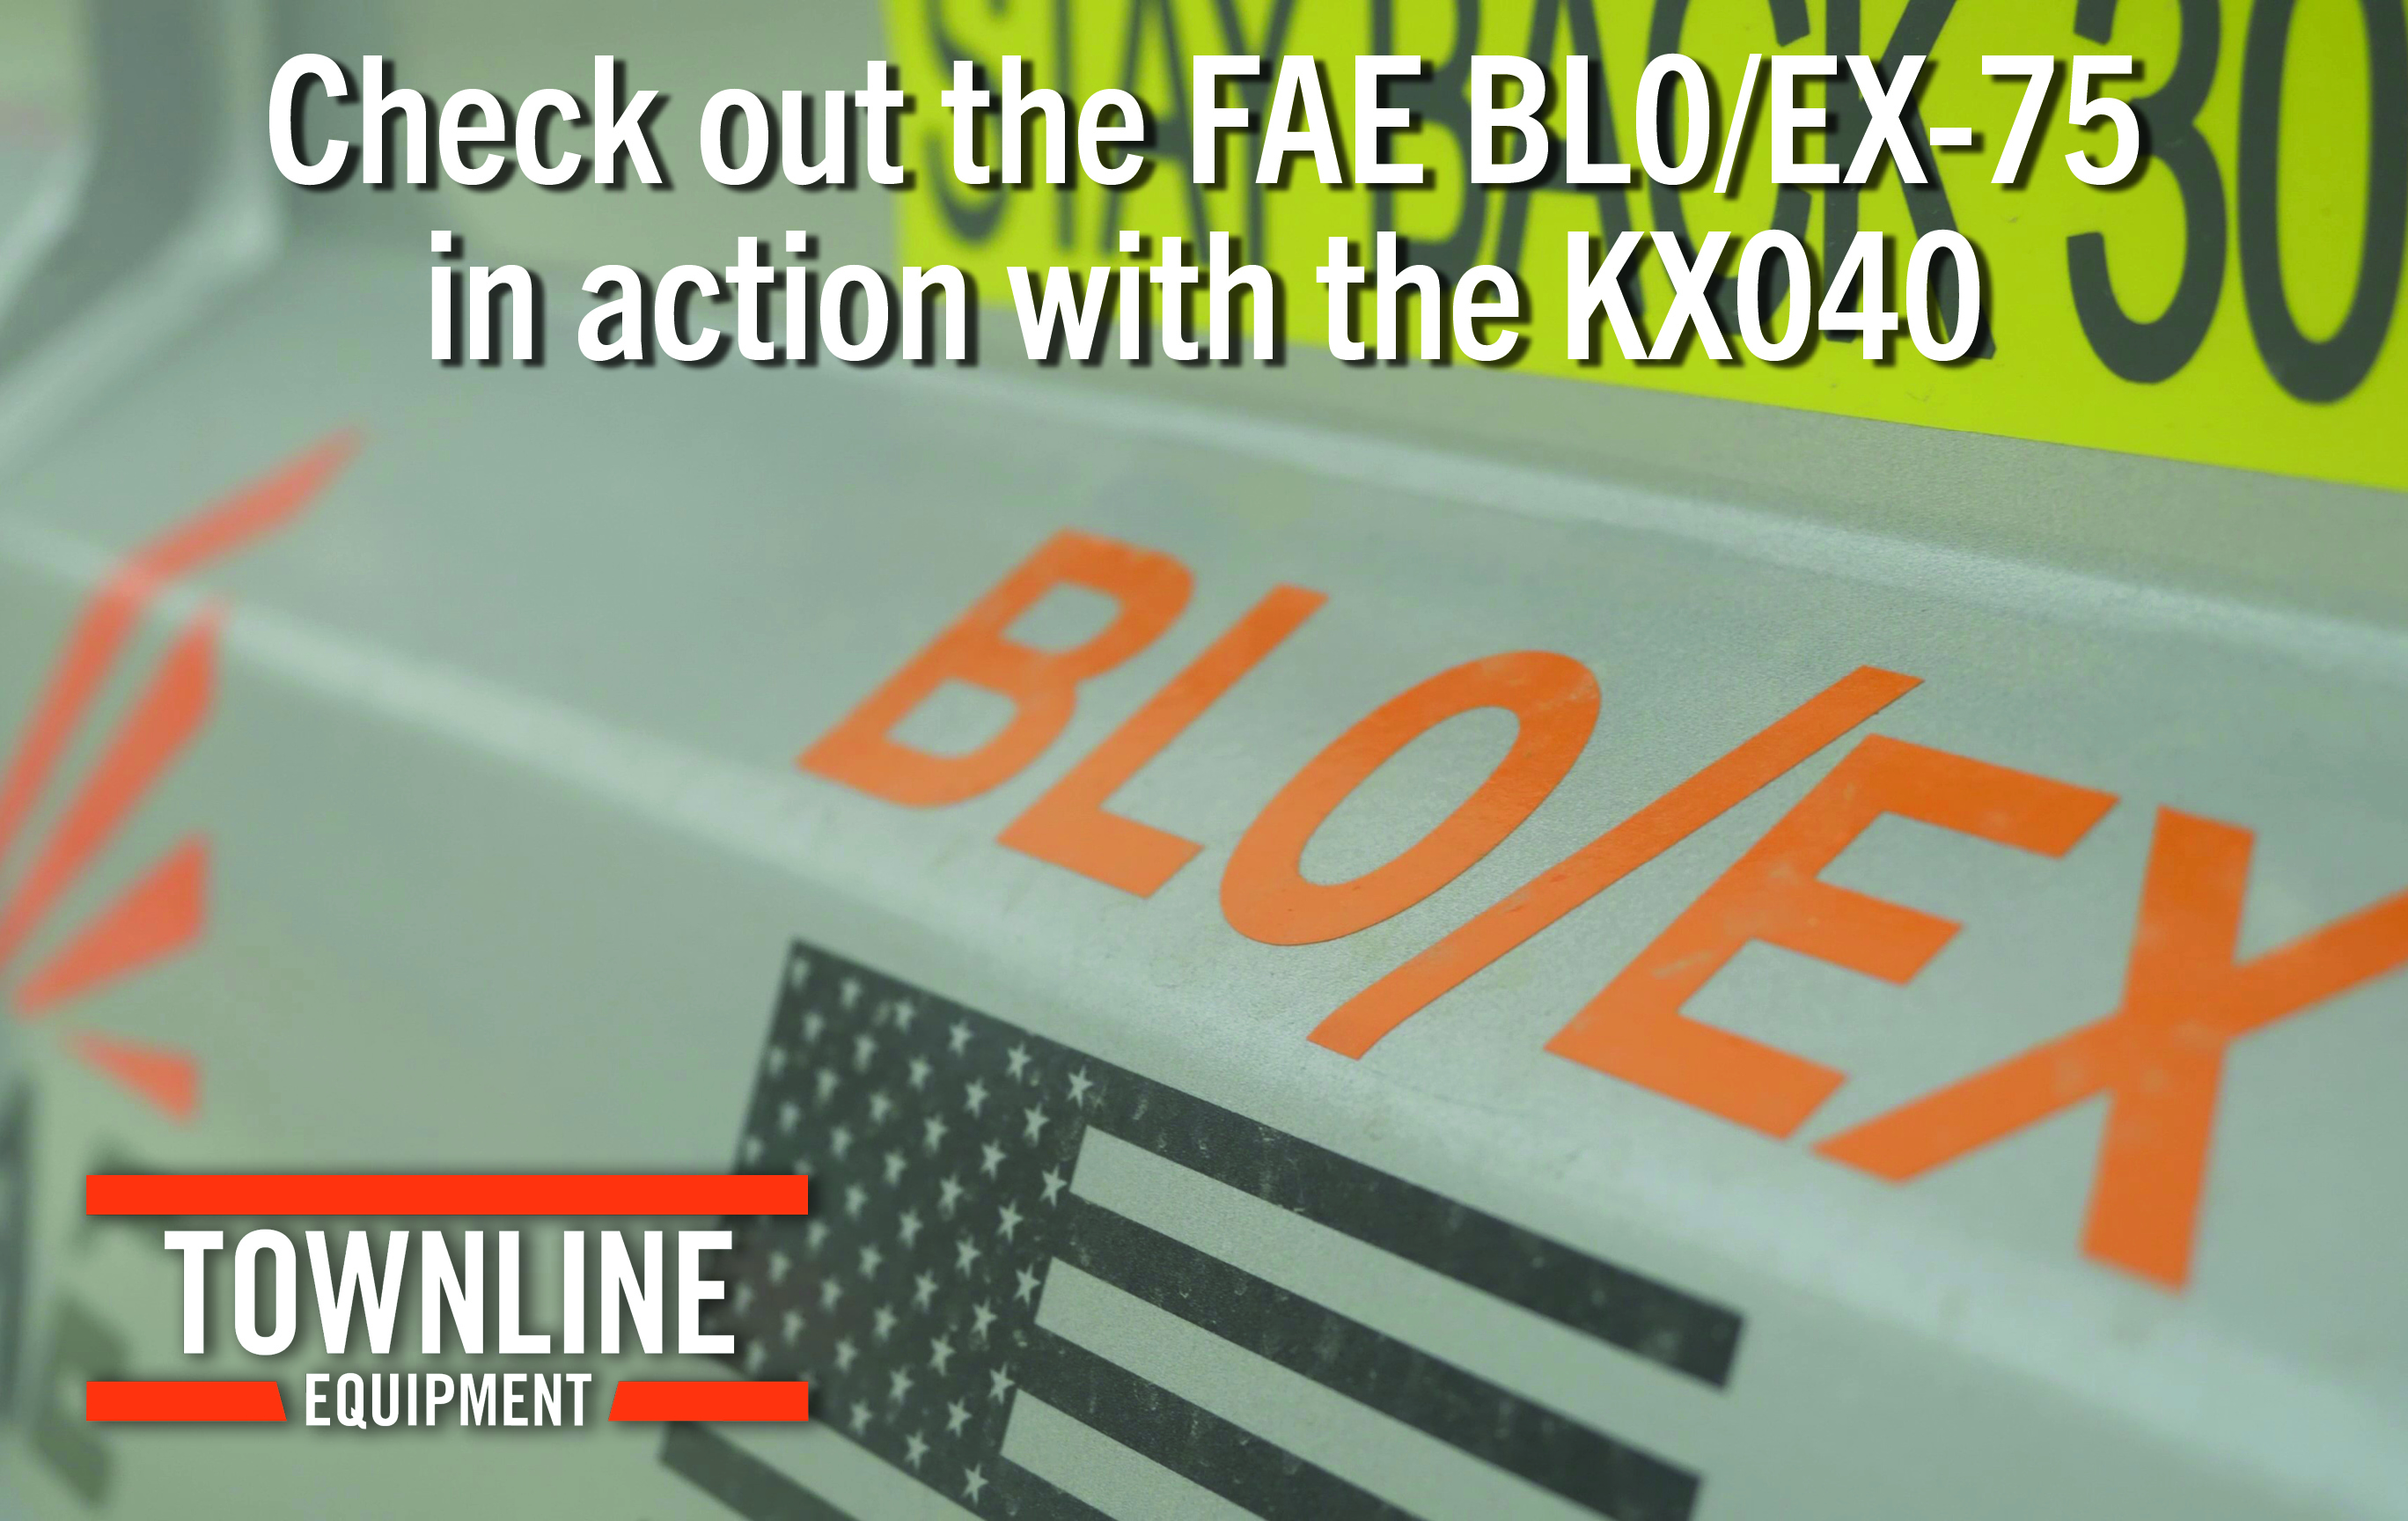 KX040 and the NEW FAE BL0/EX-75